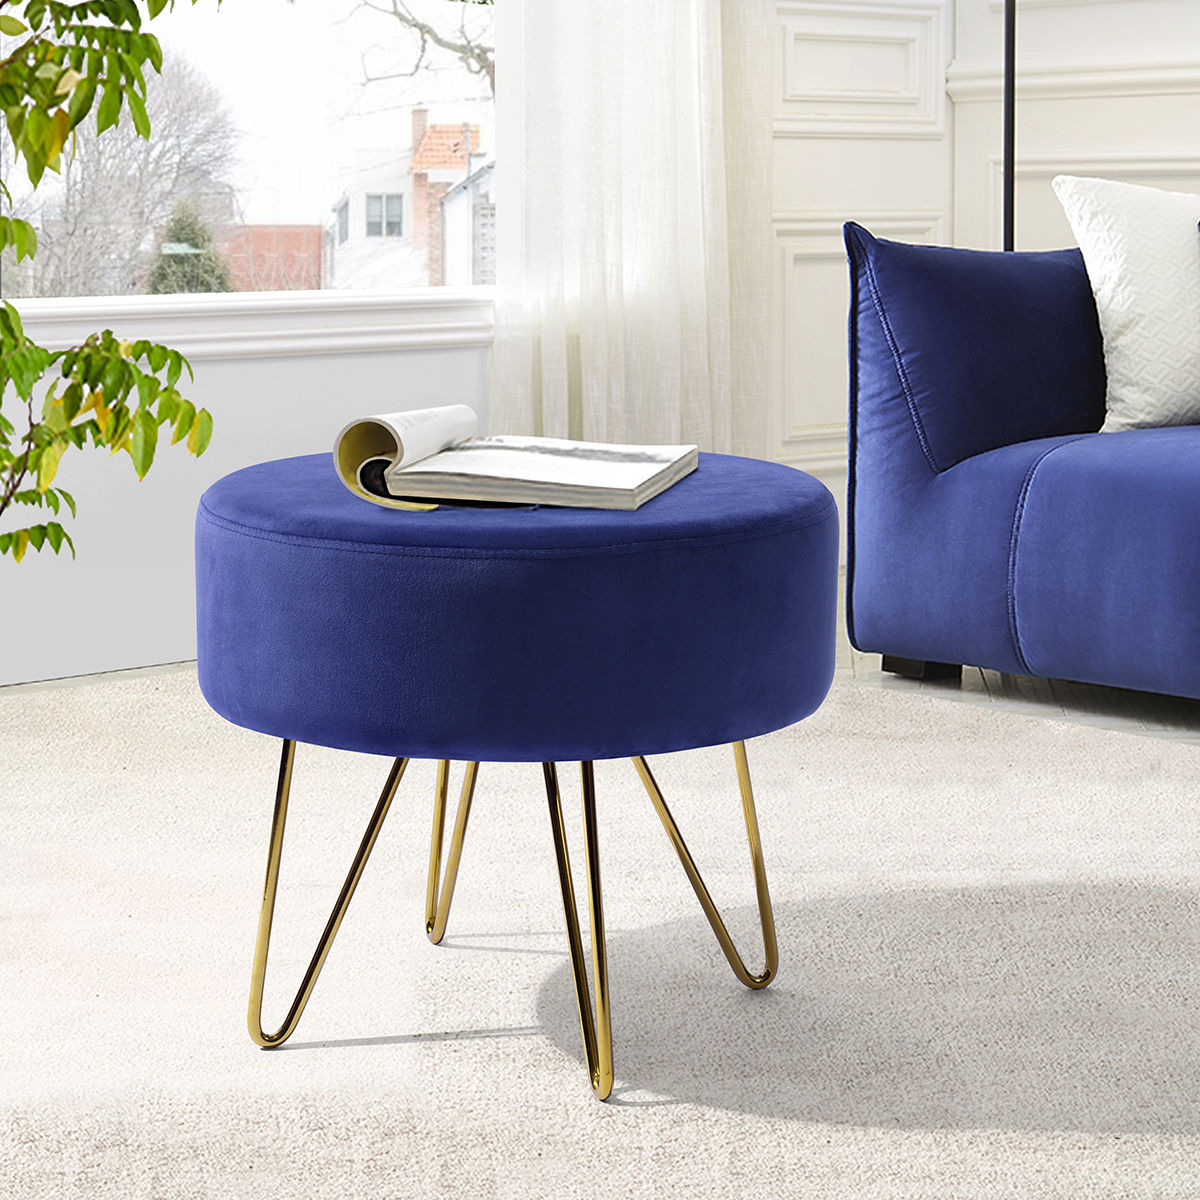 17.7"  Decorative Round Shaped Ottoman with Metal Legs - Navy Blue and Gold